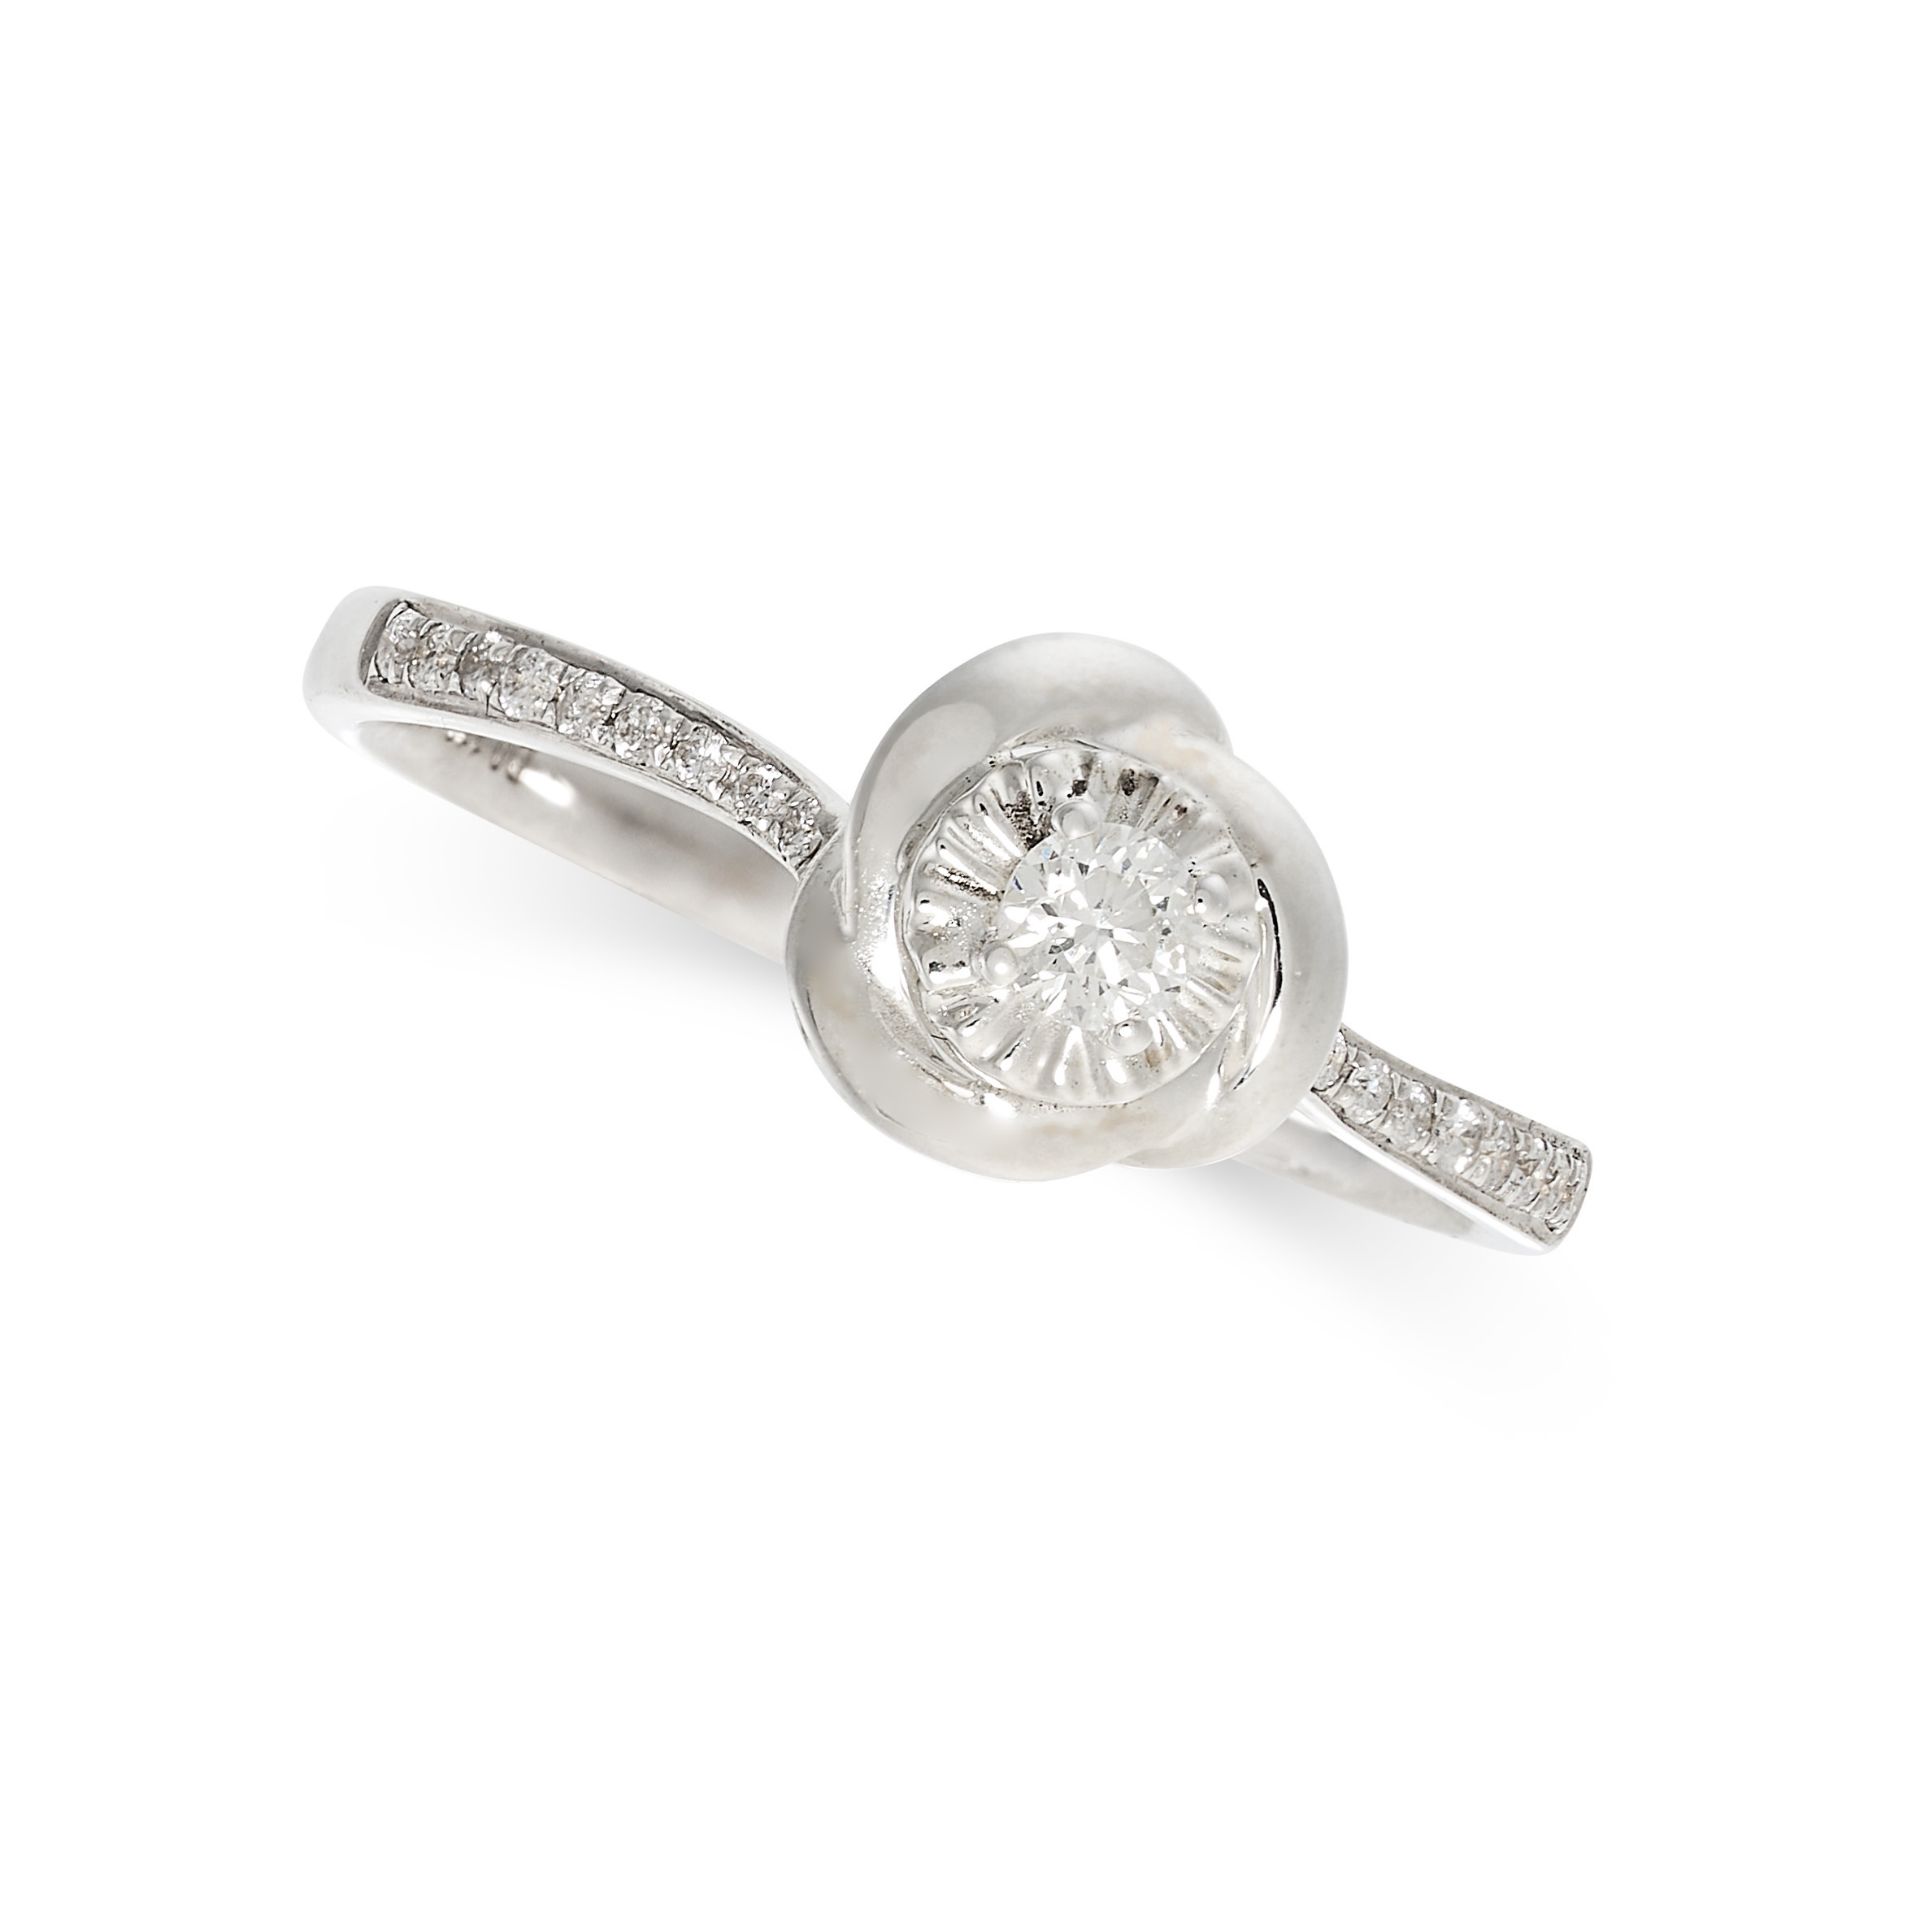 A DIAMOND DRESS RING in 9ct white gold, designed as a flower, set with round brilliant cut diamond